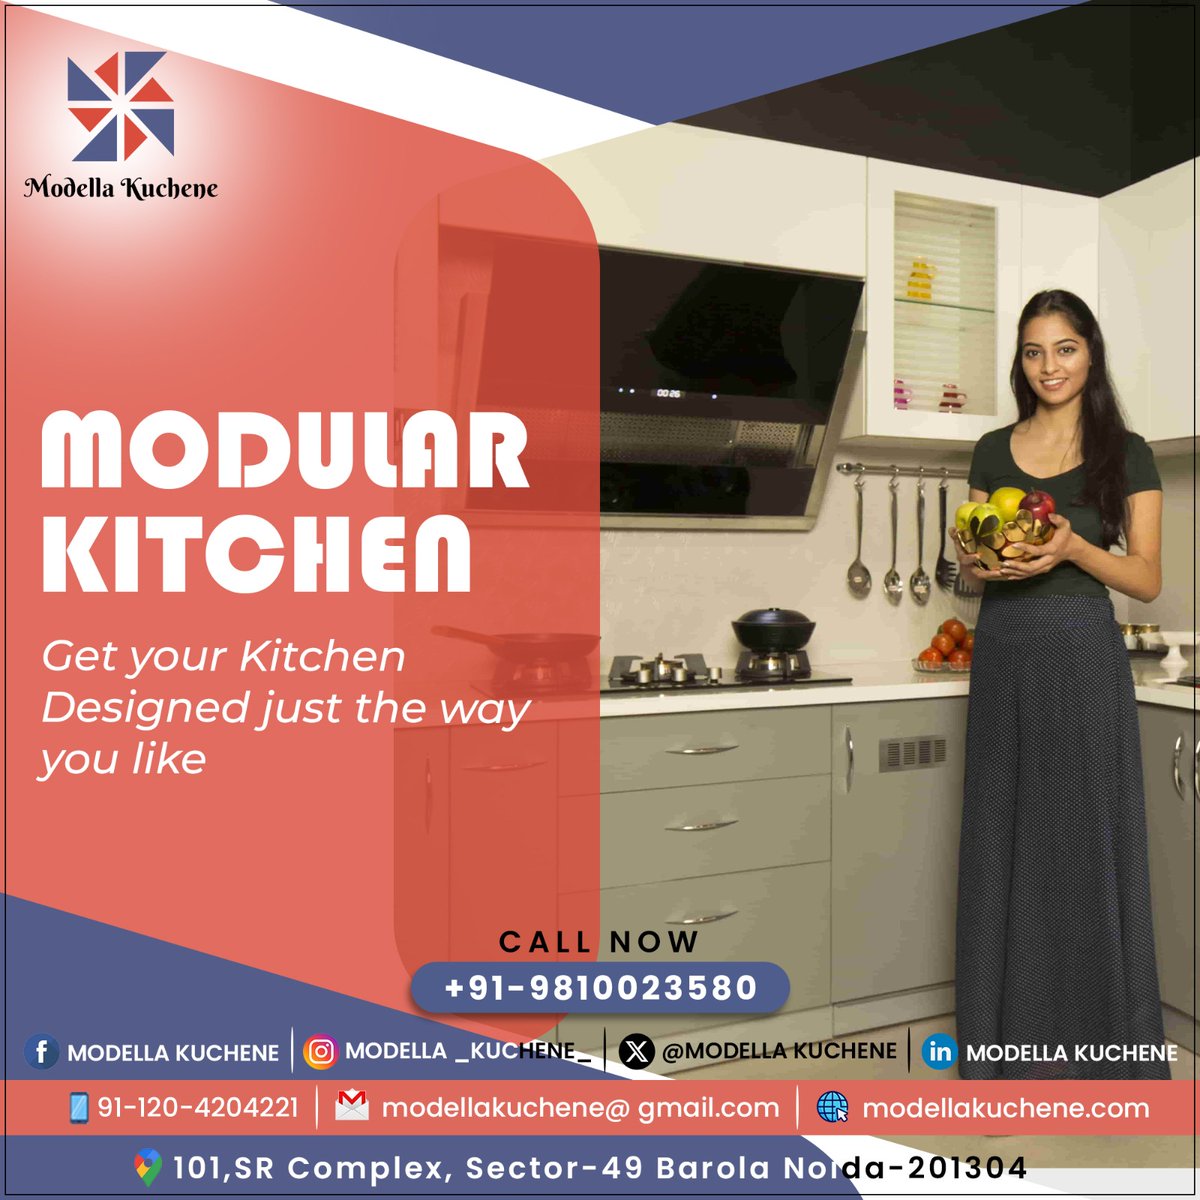 MODULAR KITCHEN
Get your kitchen Designed just the way you like.

CALL NOW +91-9810023580

#kitchen  #noida #callnow #modularkitchen #modulardesign #ModularKitchenDesigns  #kitchenrenovation  #modularkitchenaccessories #beautifulkitchen #kitchendesigns #kitchendesigntips